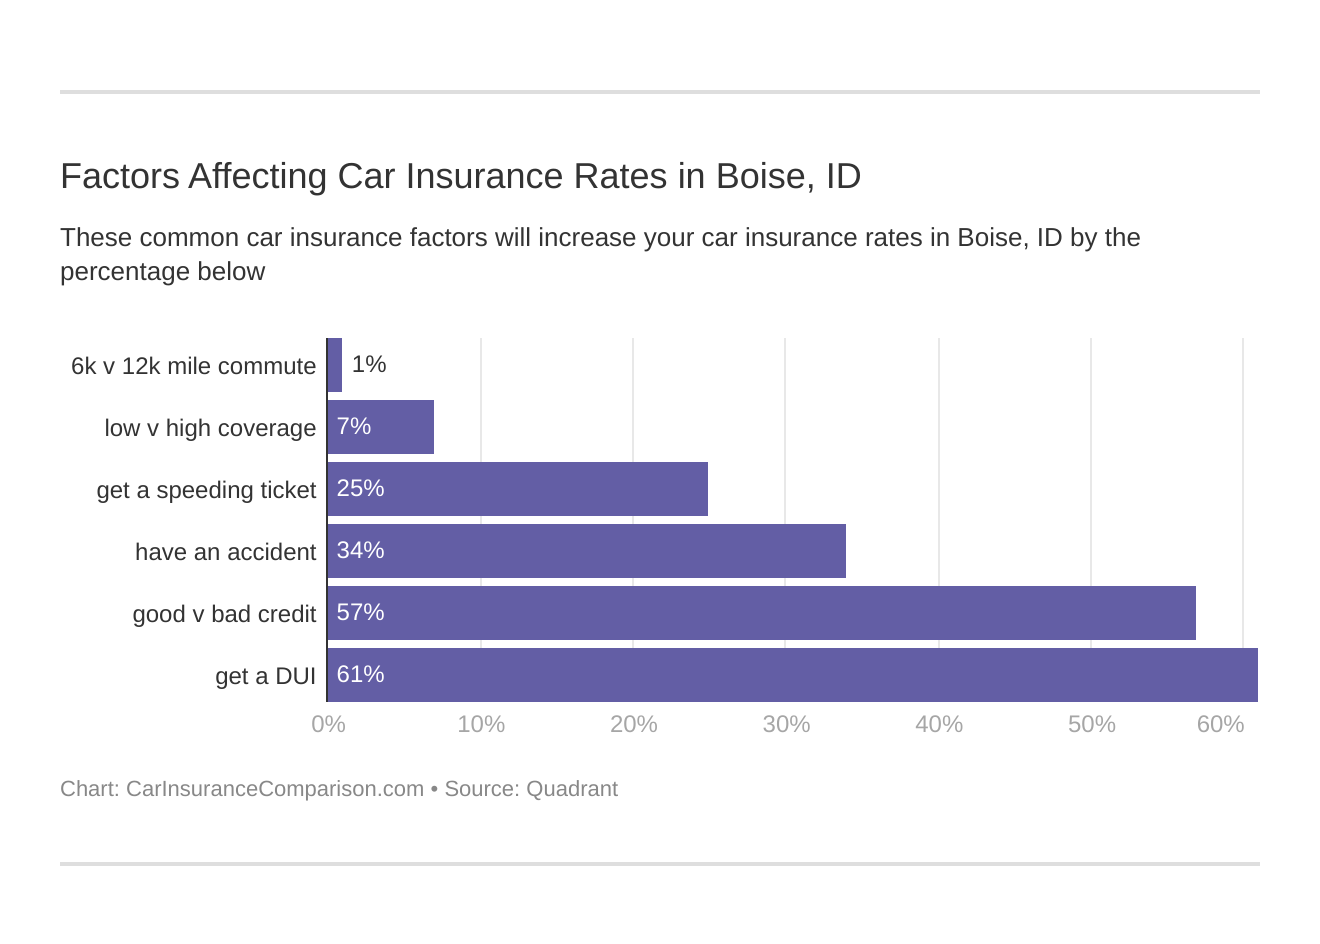 Factors Affecting Car Insurance Rates in Boise, ID